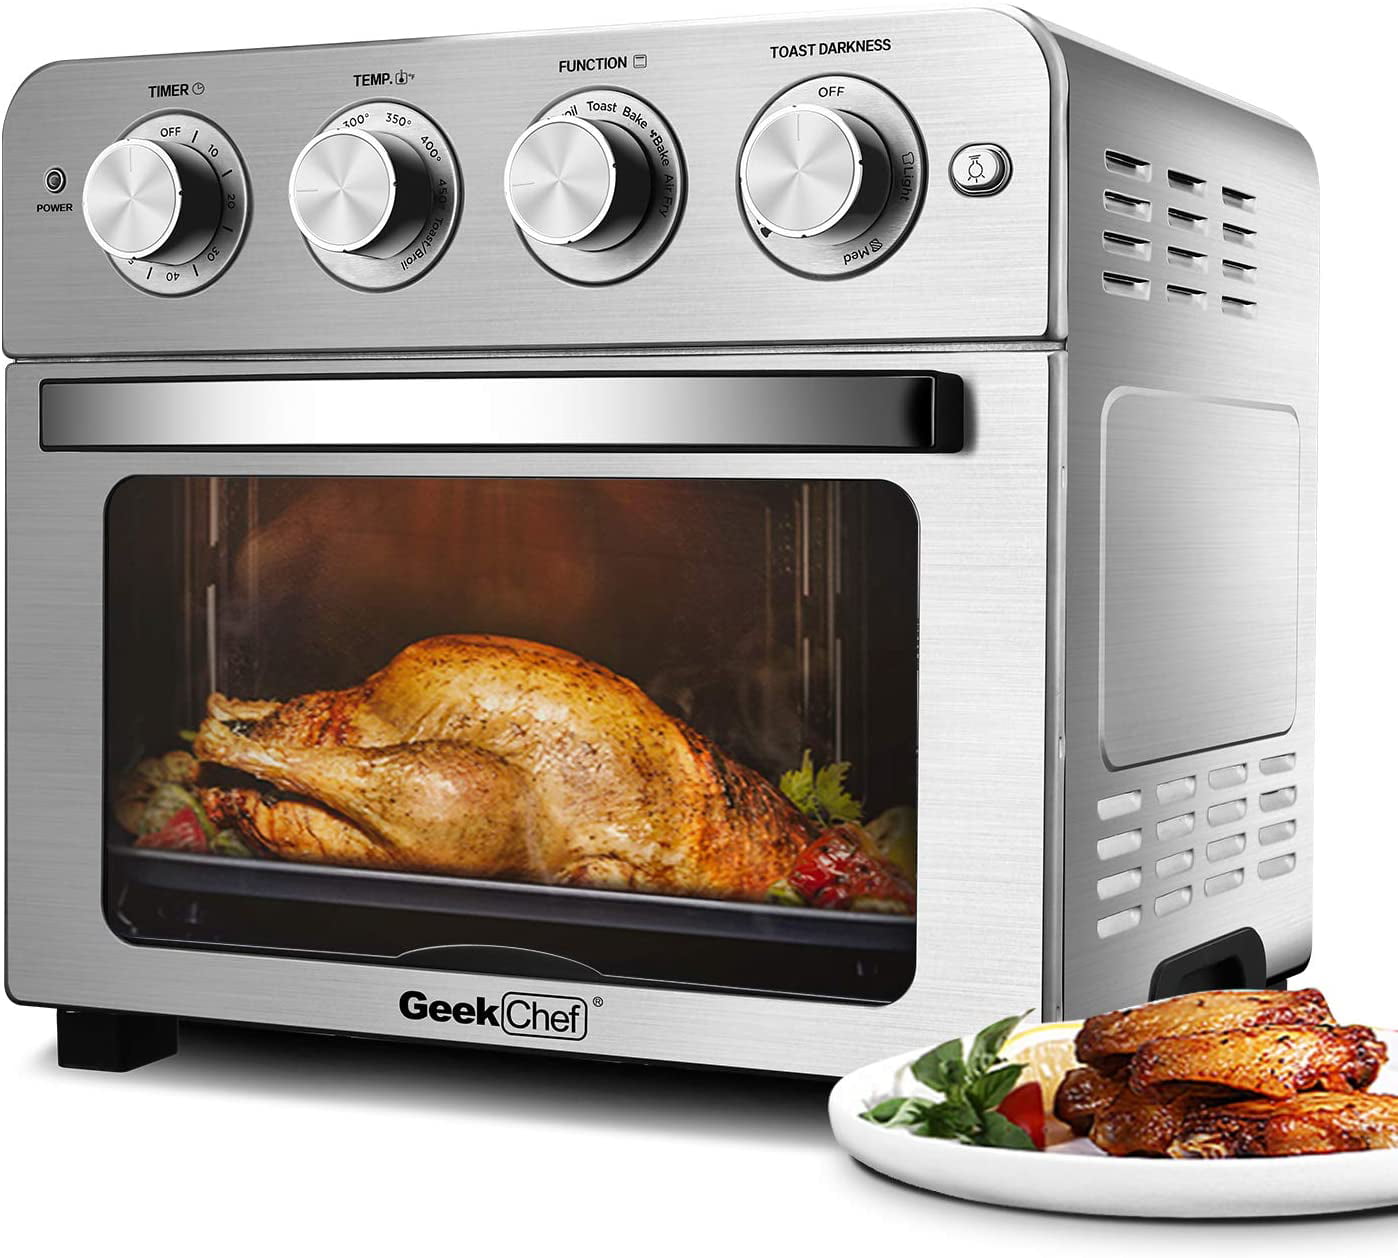 Geek Chef Air Fry Oven, Countertop Toaster Oven, 3-Rack Levels, 16 ...